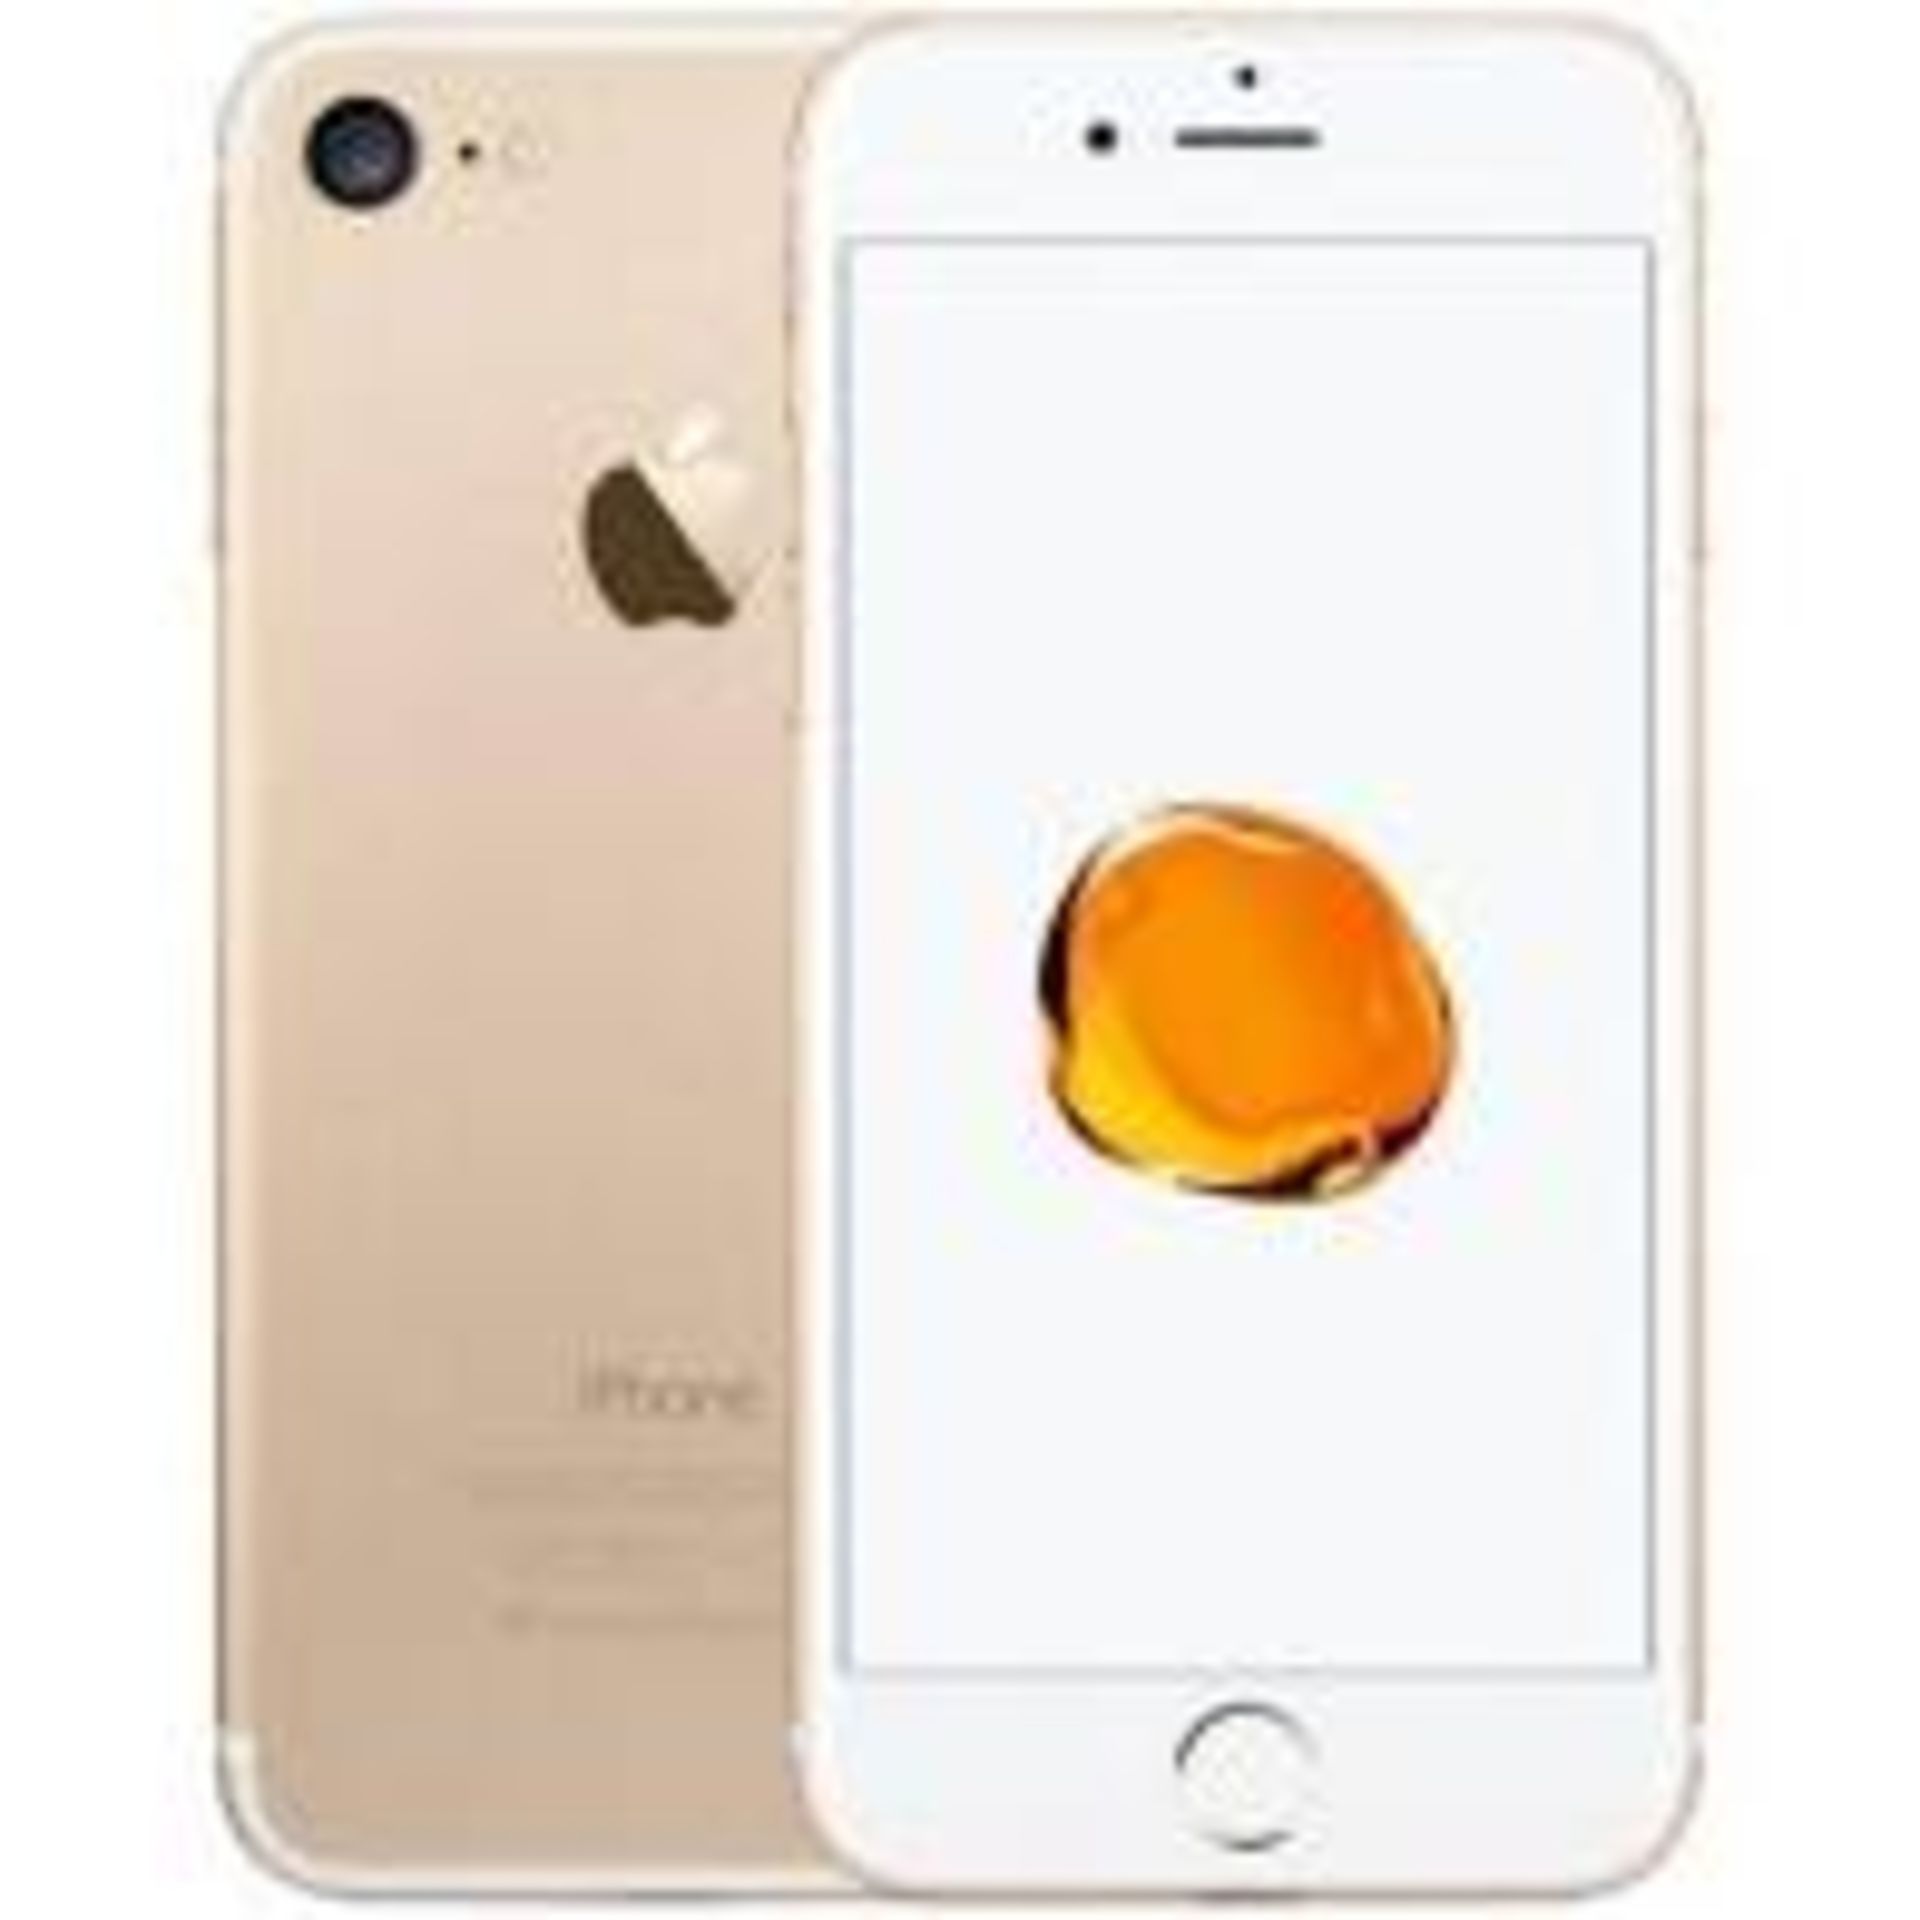 RRP £320 Apple iPhone 7 32GB Gold, Grade A (Appraisals Available Upon Request) (Pictures Are For